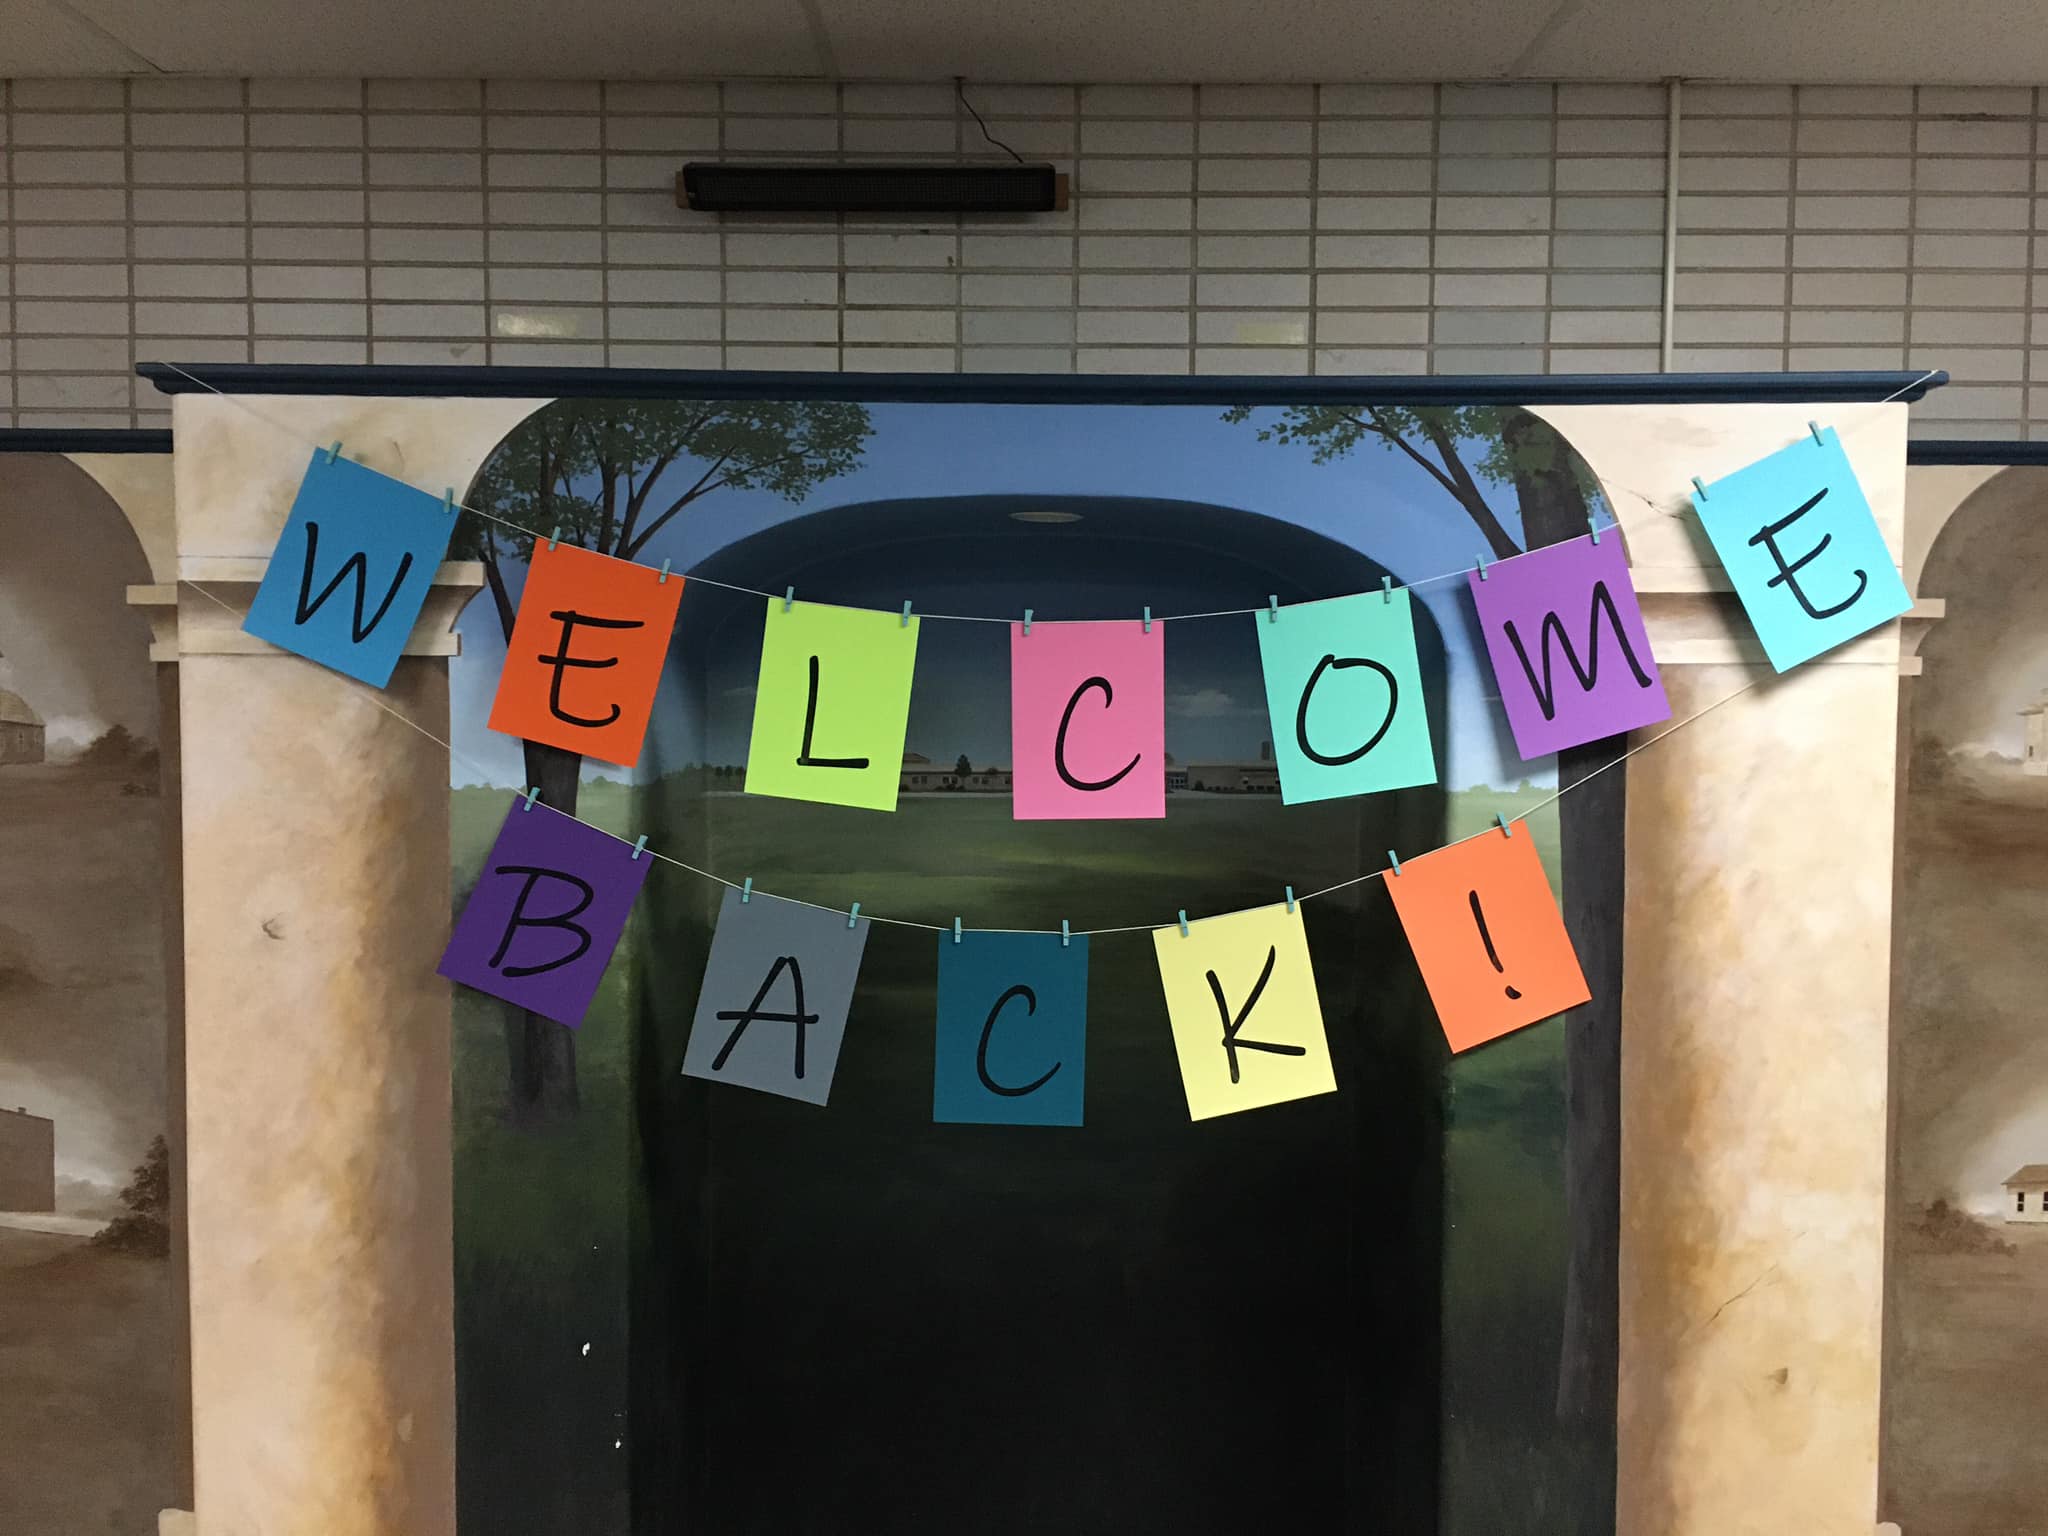 Welcome Back Sign